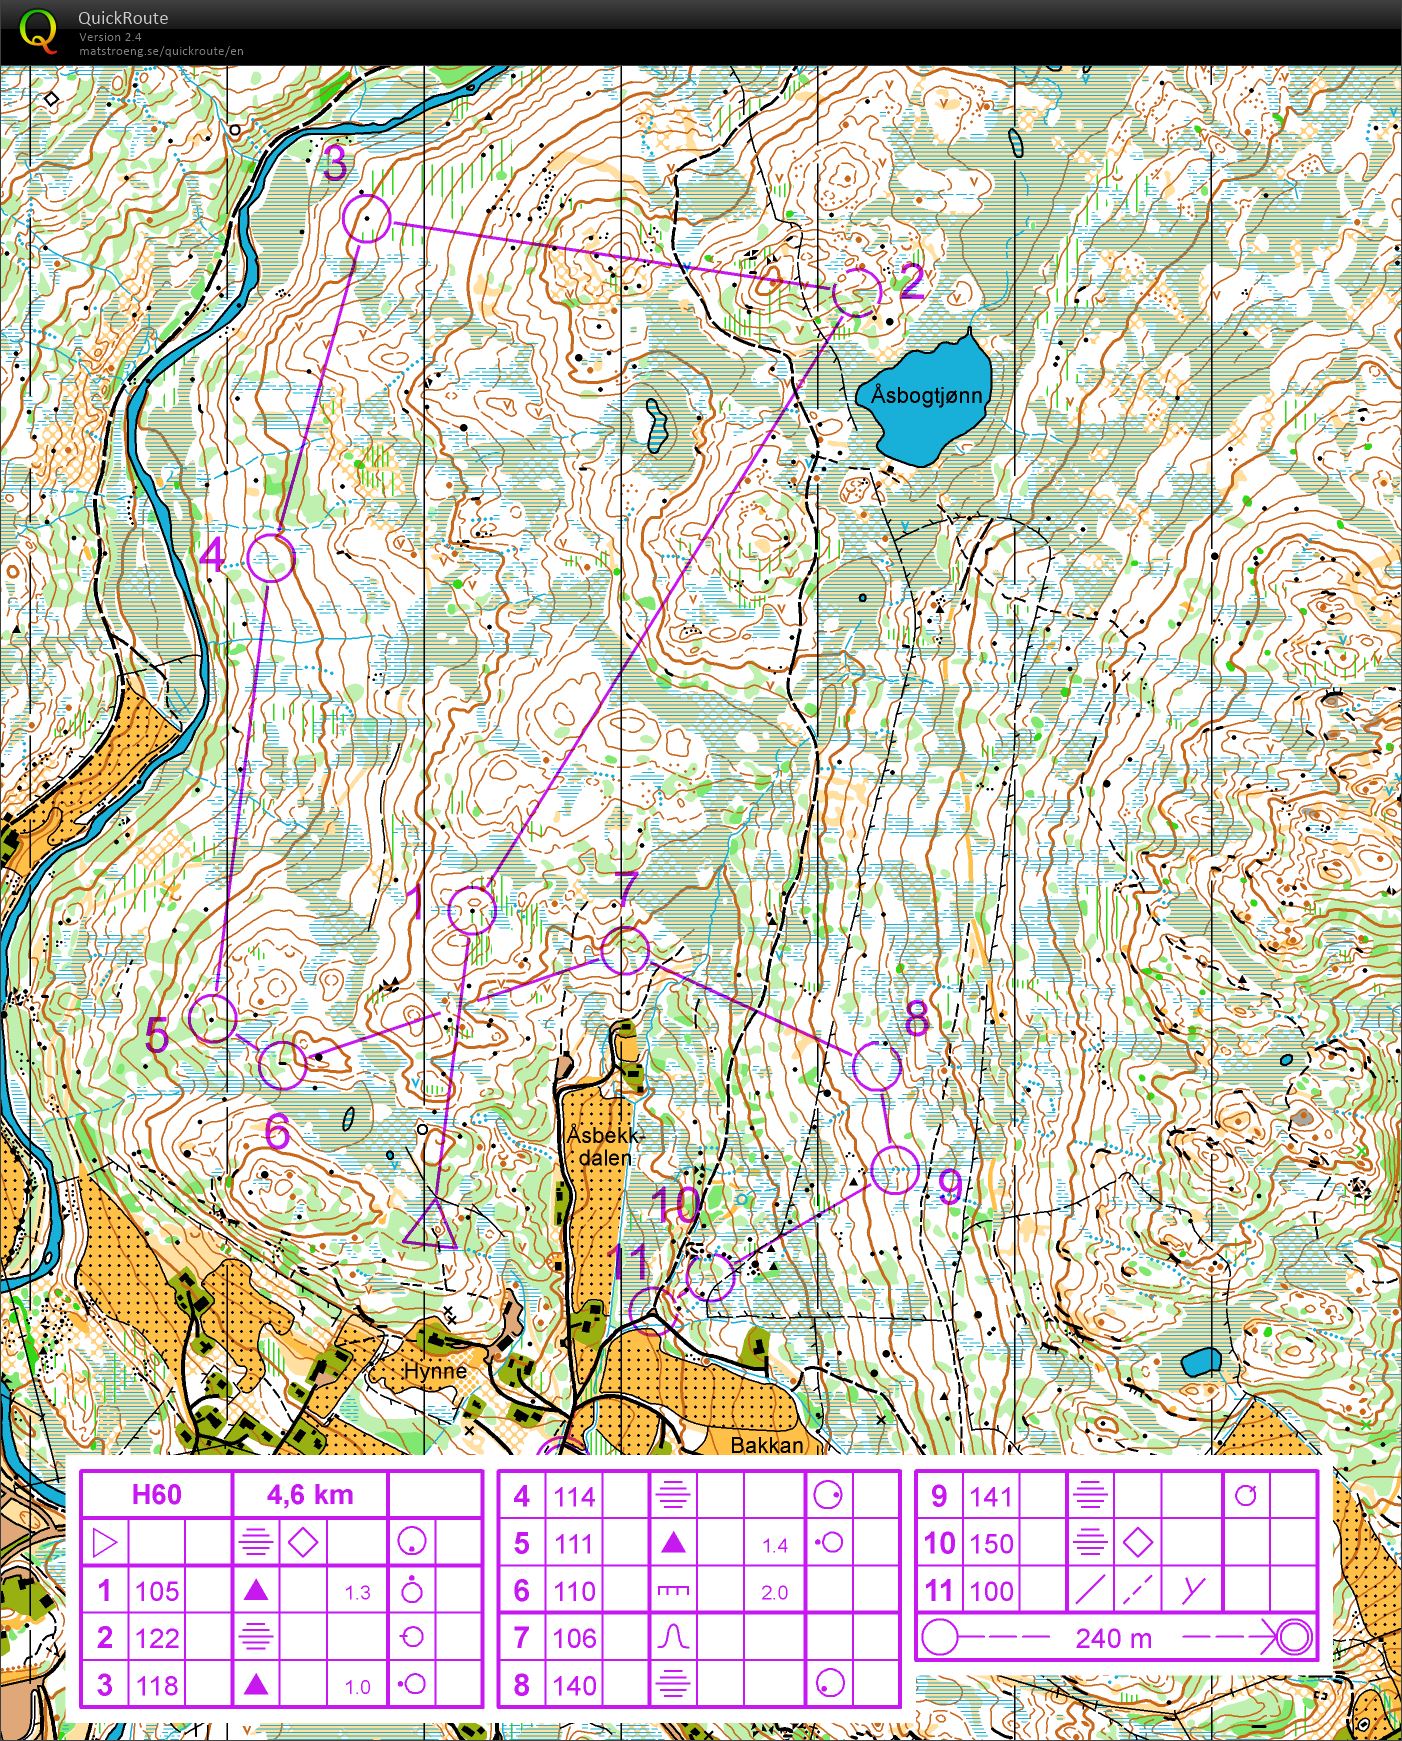 Re-run of H60 Long course from VM in Rauland (12-10-2017)